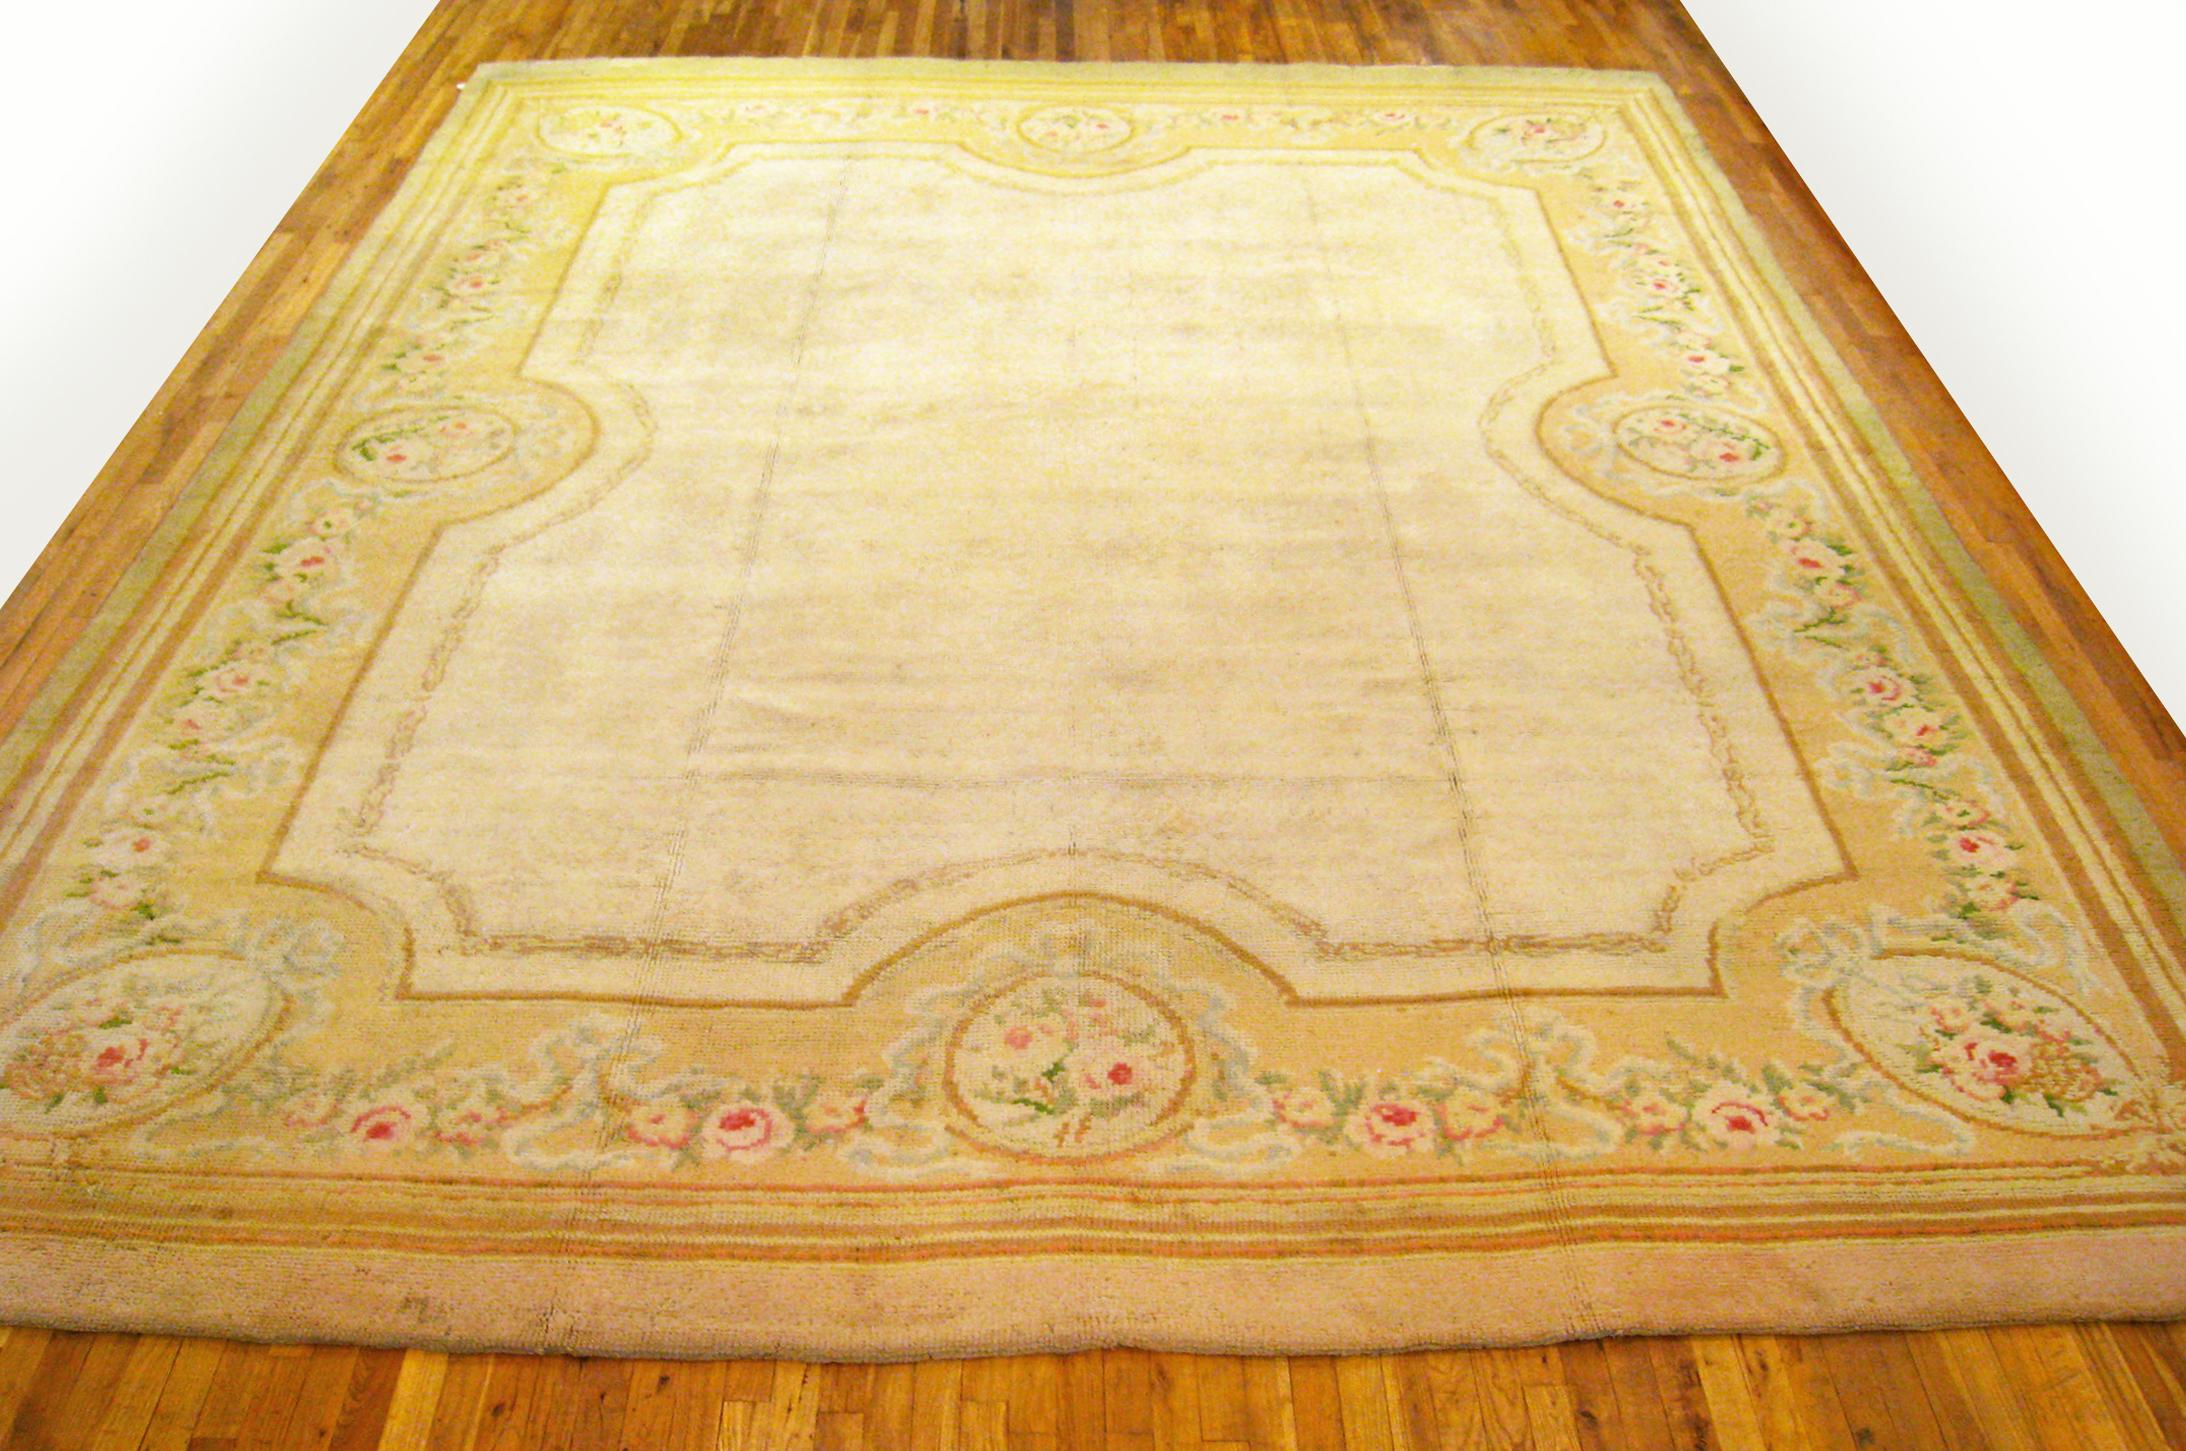 Antique European Savonnerie Oriental Carpet

A one-of-a-kind antique European Savonnerie Oriental Carpet, hand-knotted with short wool pile. Featuring a open field design on the ivory primary field, with rose outer border. In large size, size 14' 2